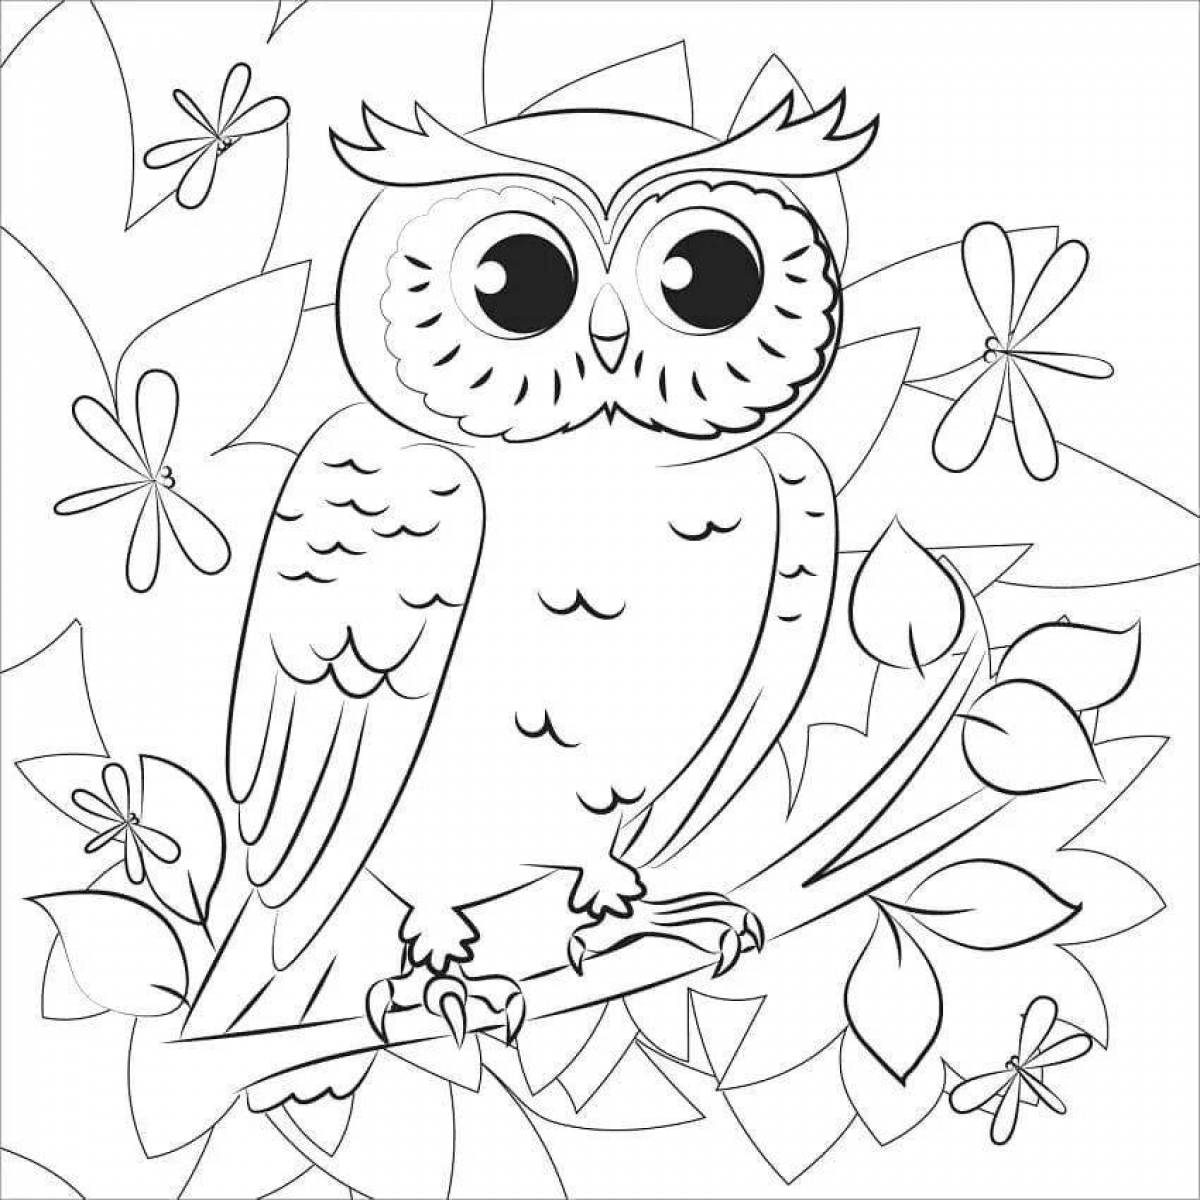 Coloring page graceful owl on a tree